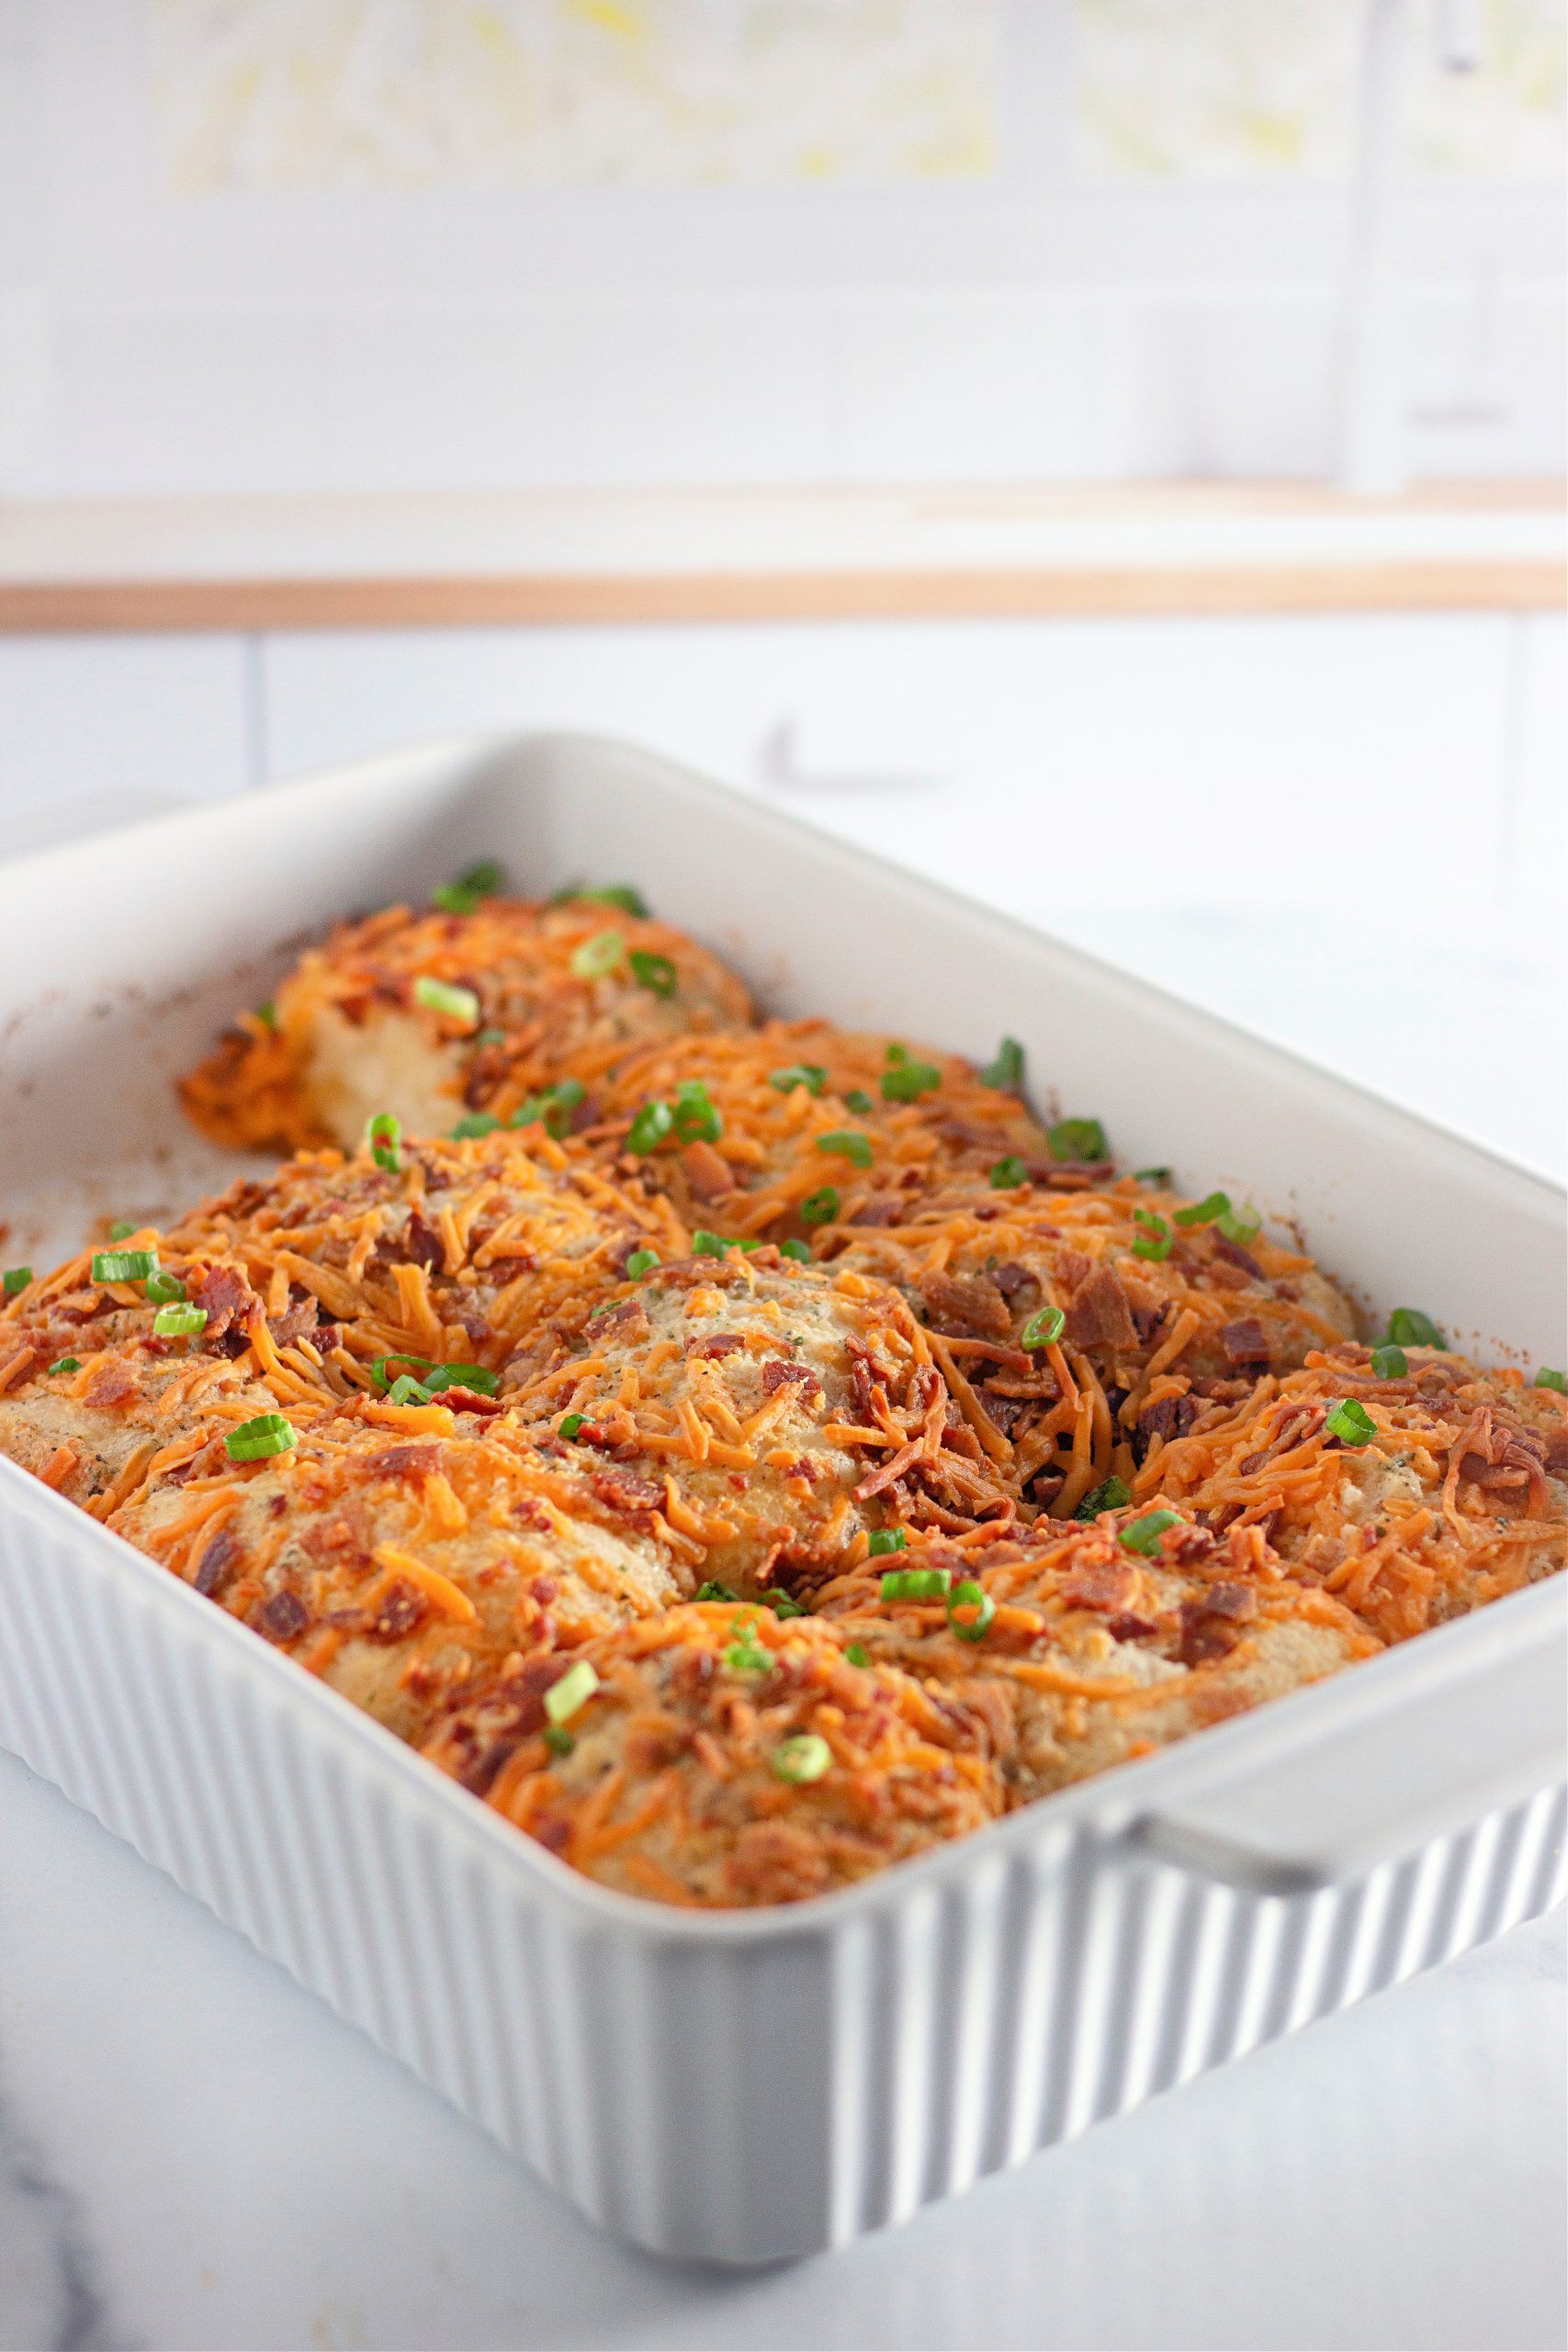 White baking dish filled with Baked biscuits topped with cheese, bacon, and green onions.